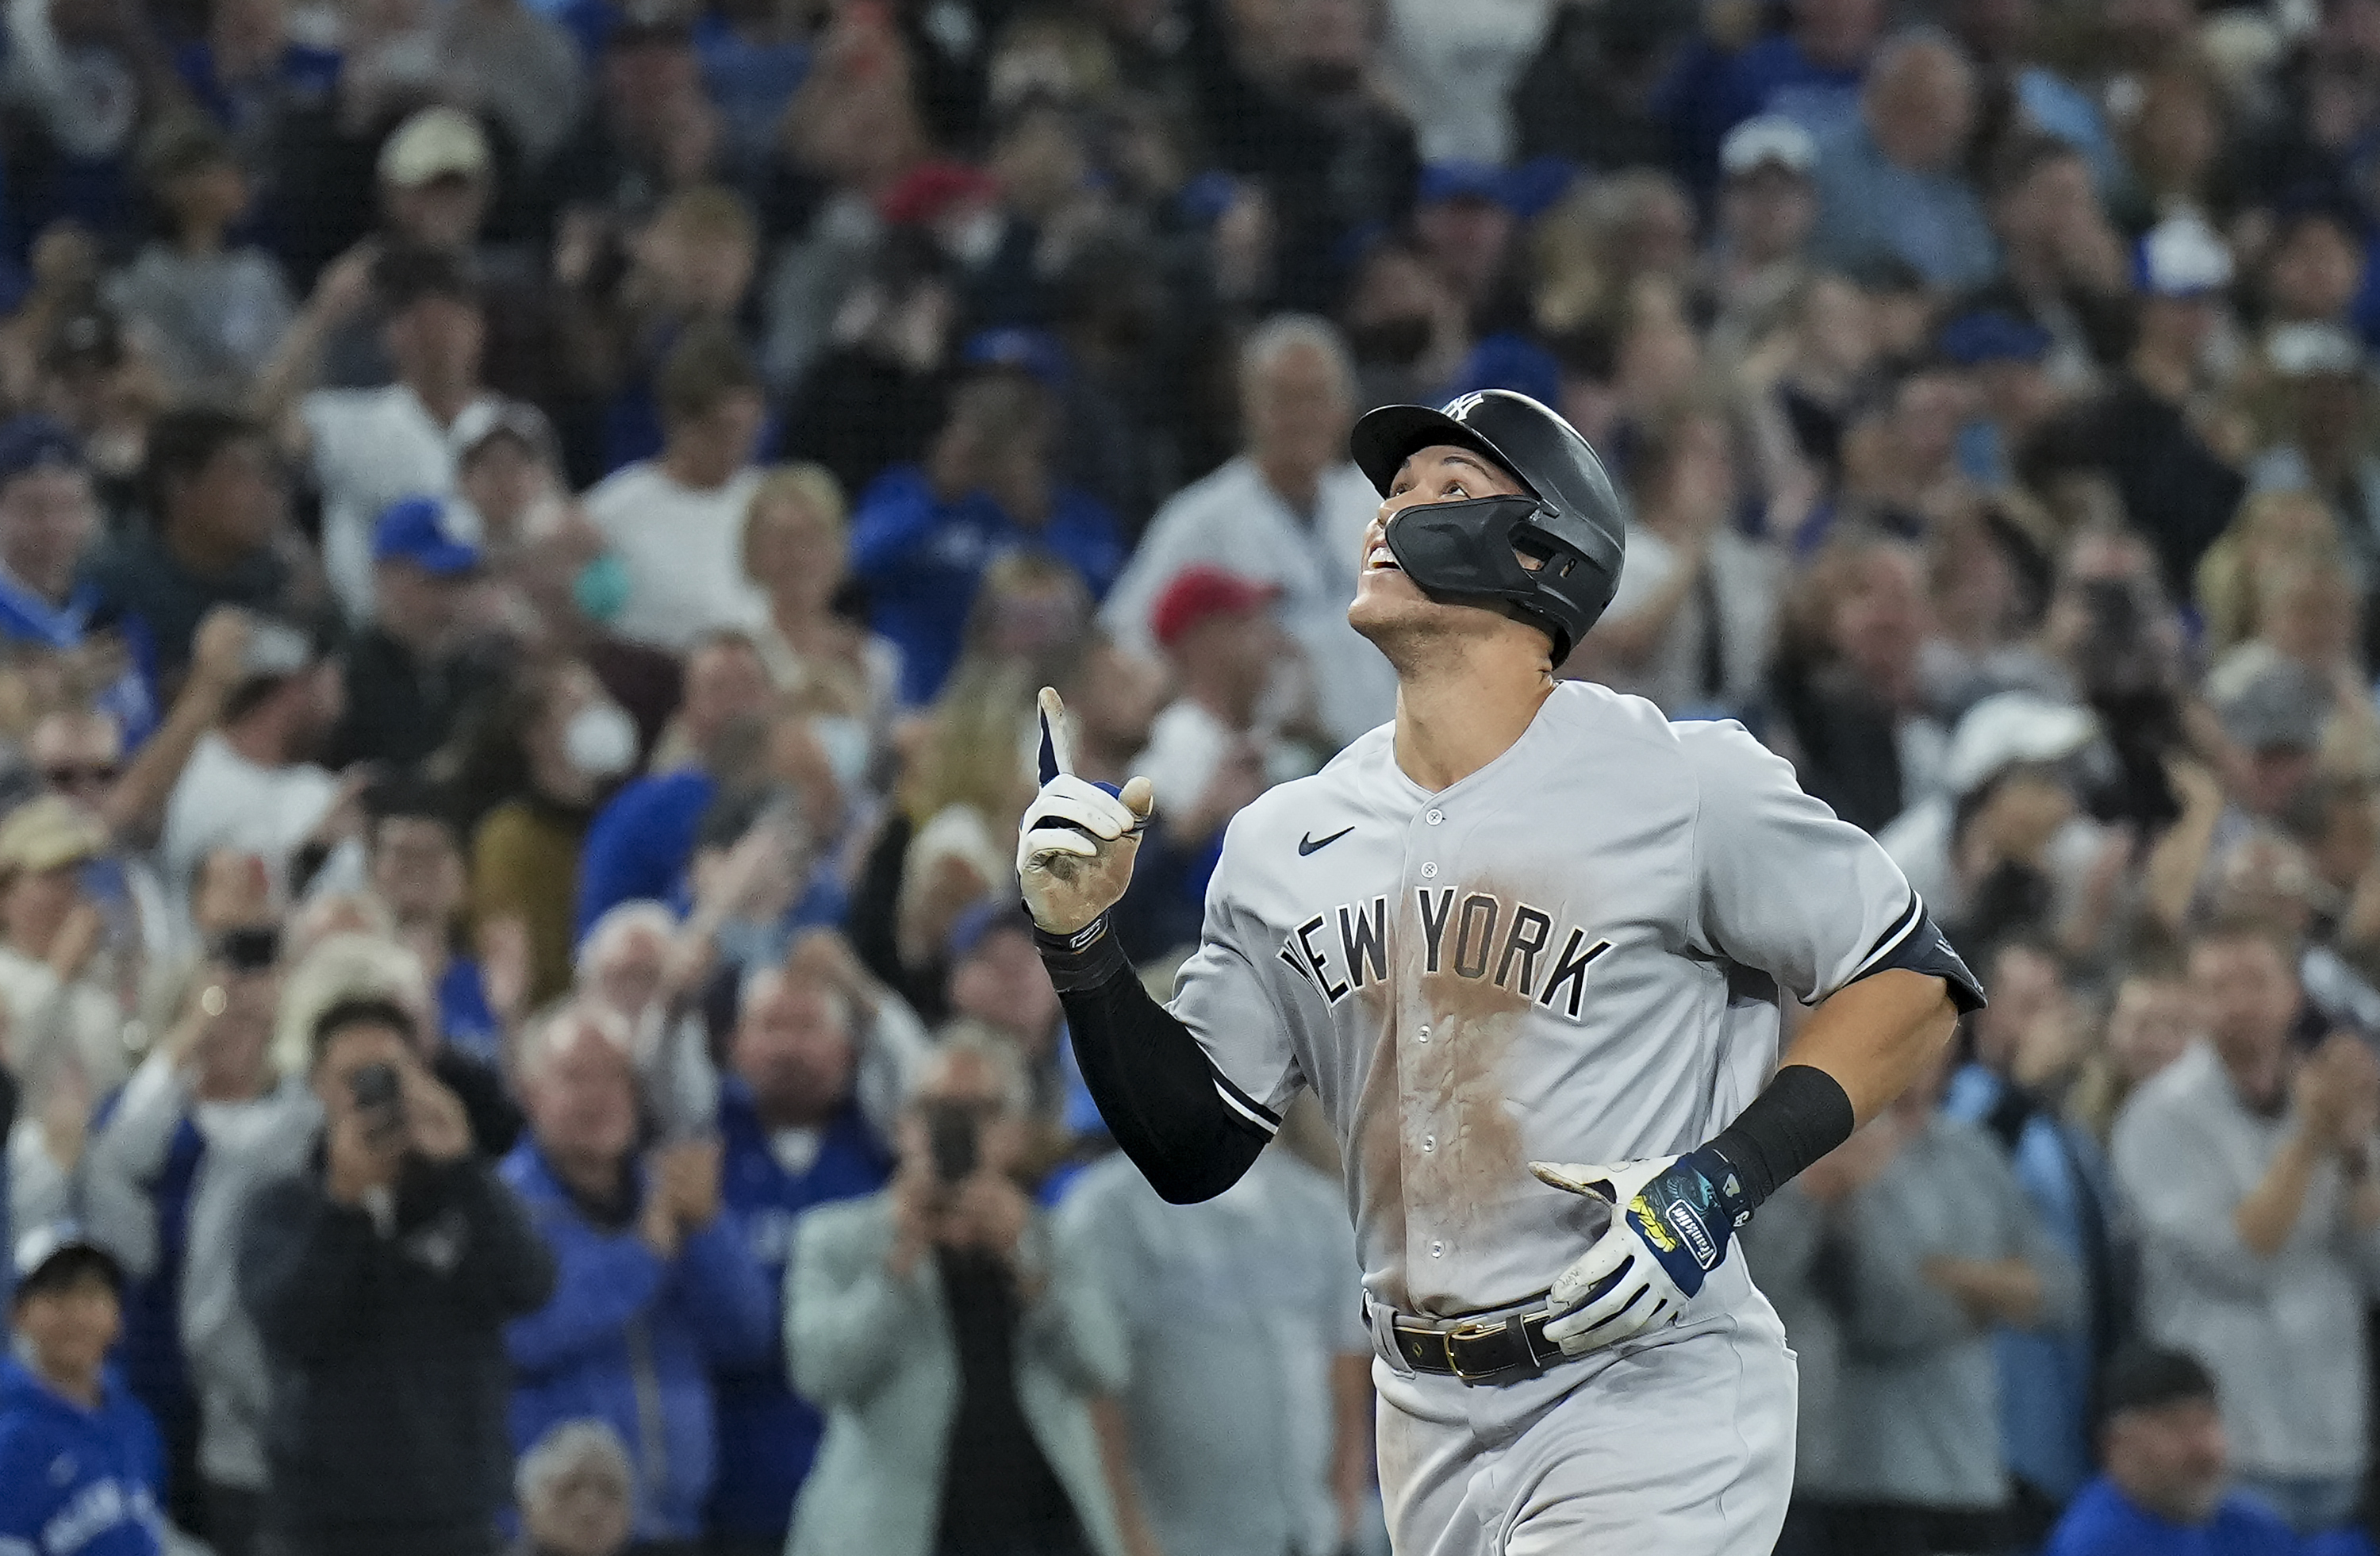 Yankees beat Blue Jays to clinch AL East; Judge stays at 60